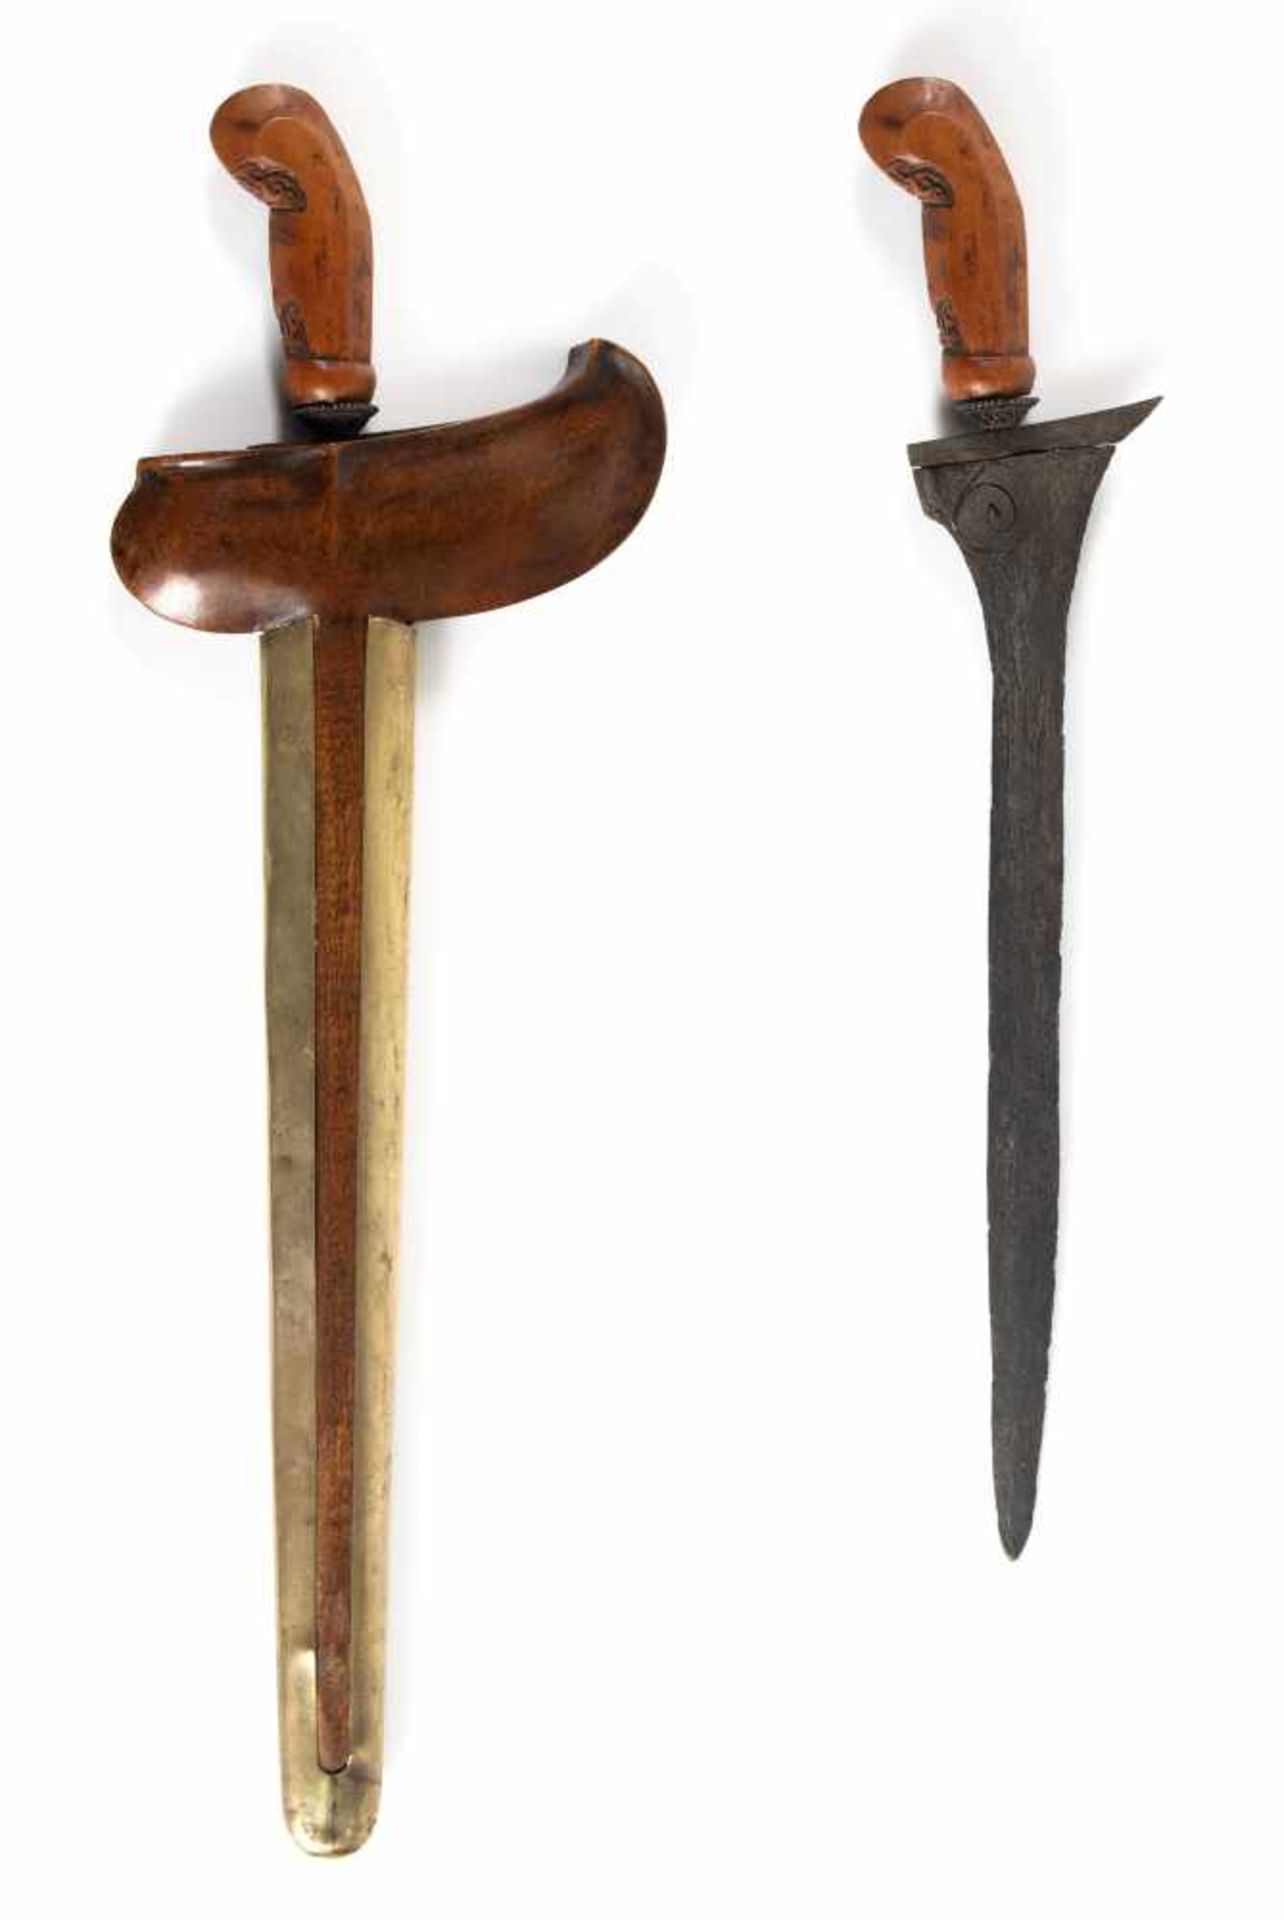 A West Javanese Keris, with 13th century blade.A West Javanese Keris, with 13th century blade.